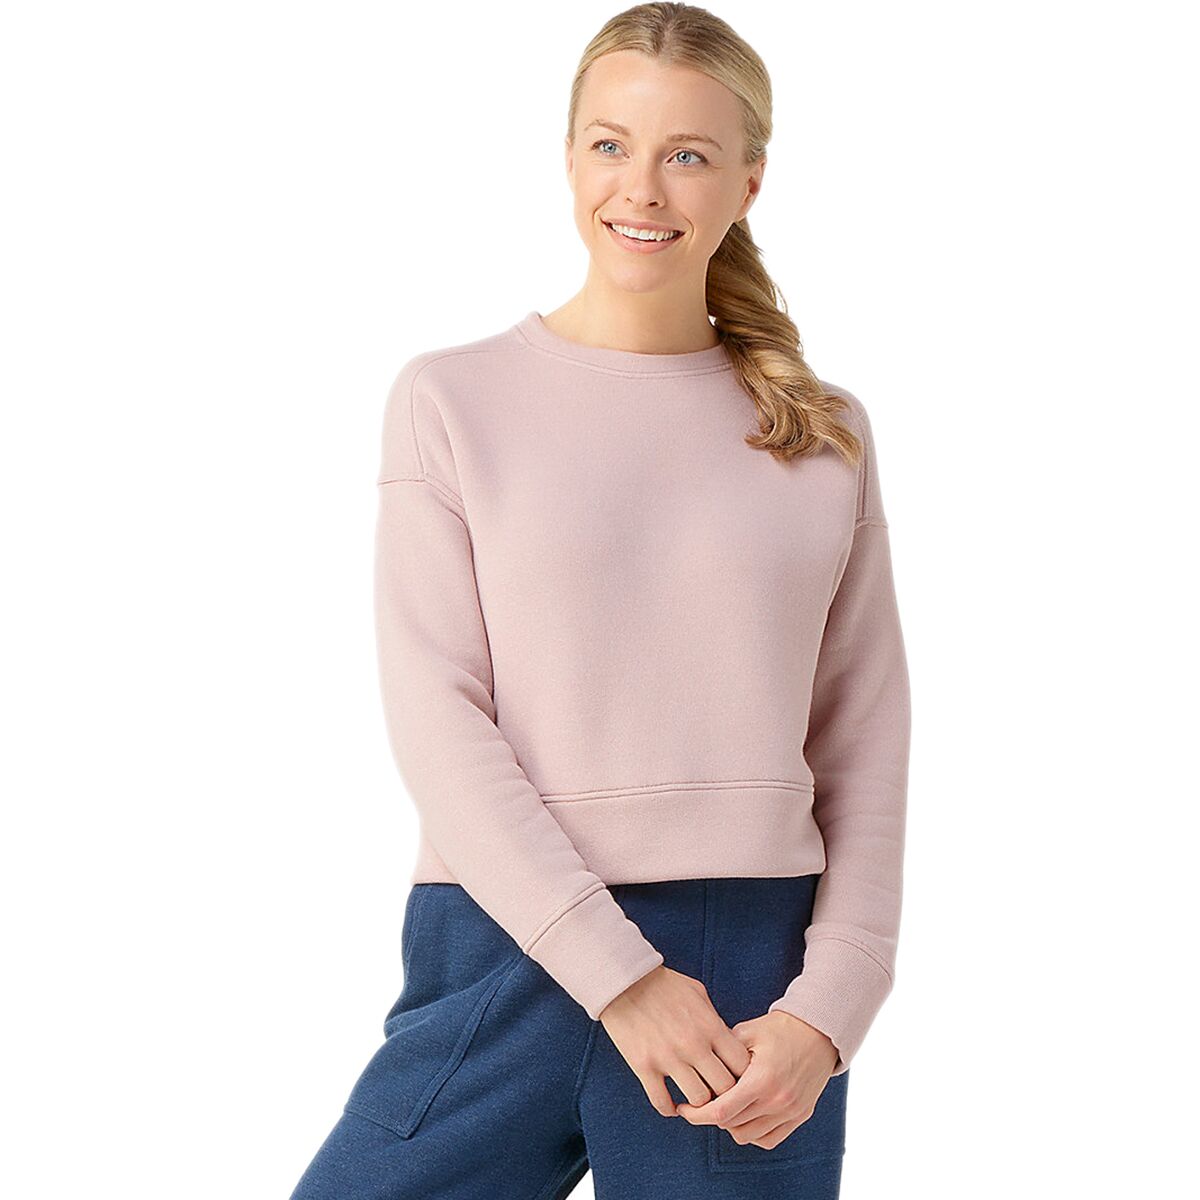 Smartwool Recycled Terry Cropped Crew Sweatshirt - Women's